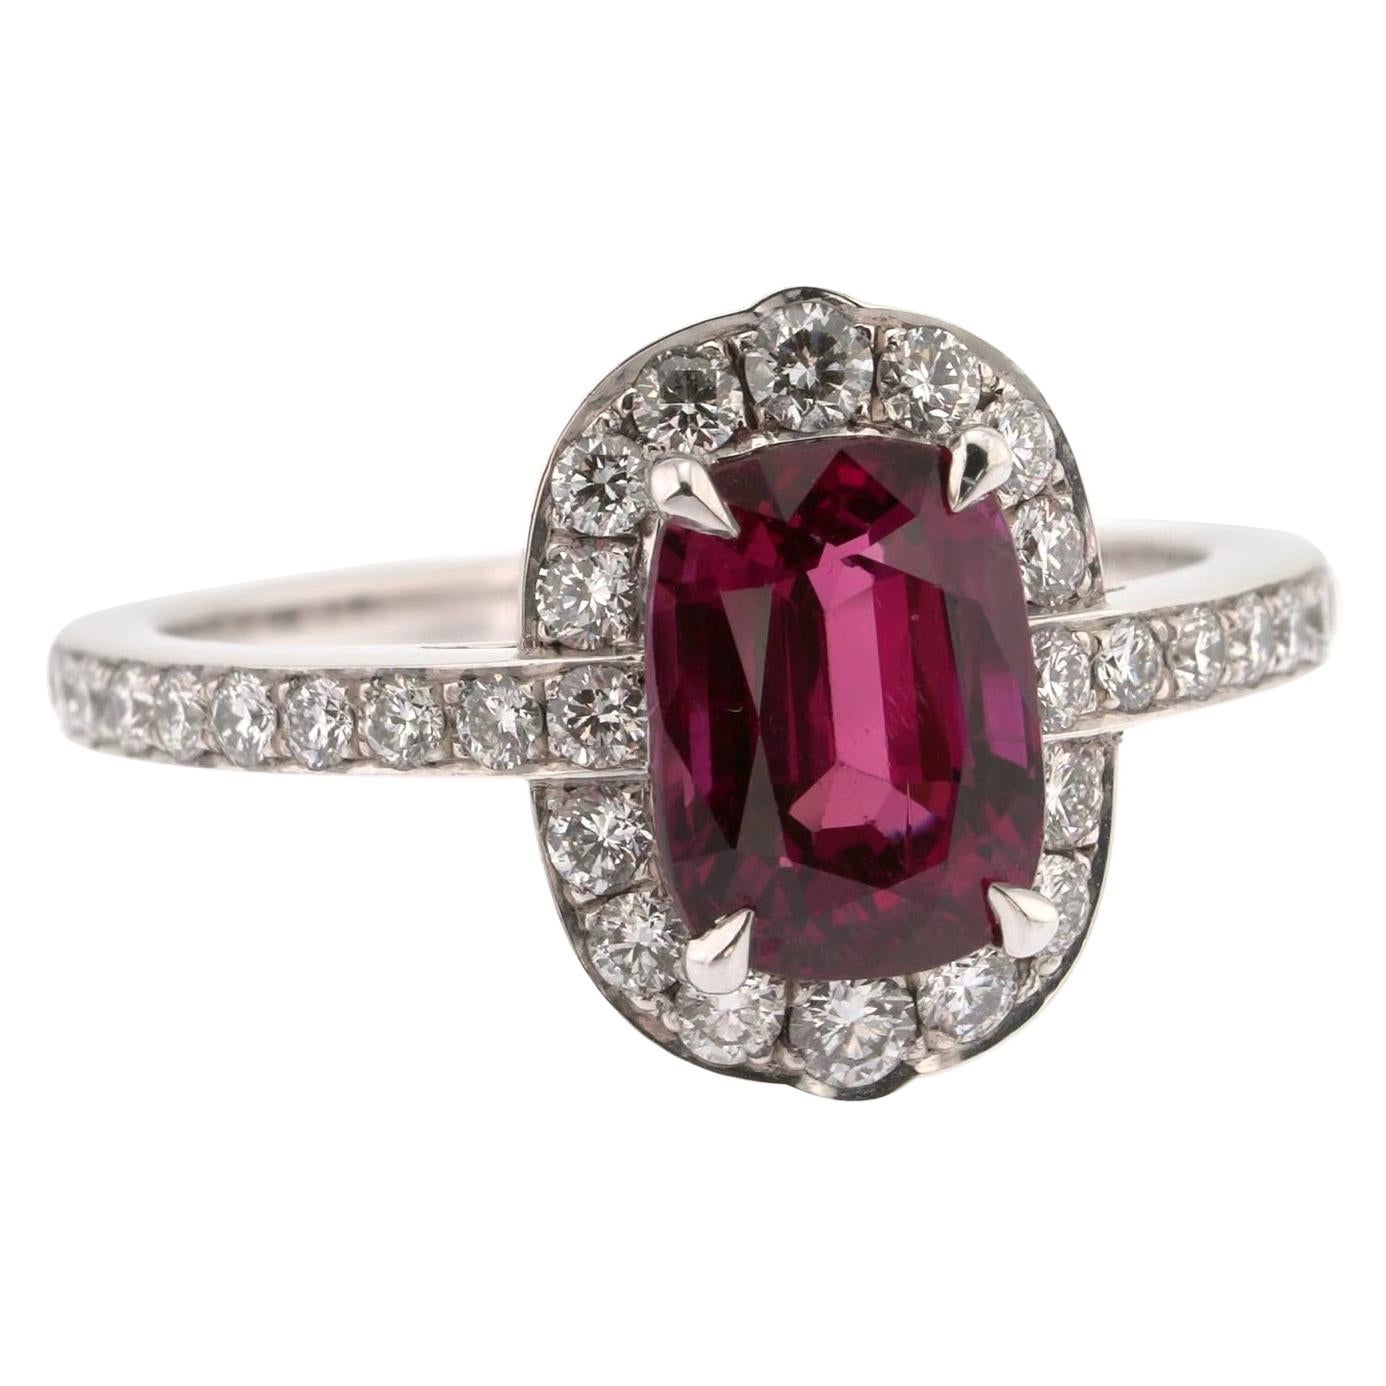 2.70 Carats Deep Red Ruby and White Diamond Halo Ring